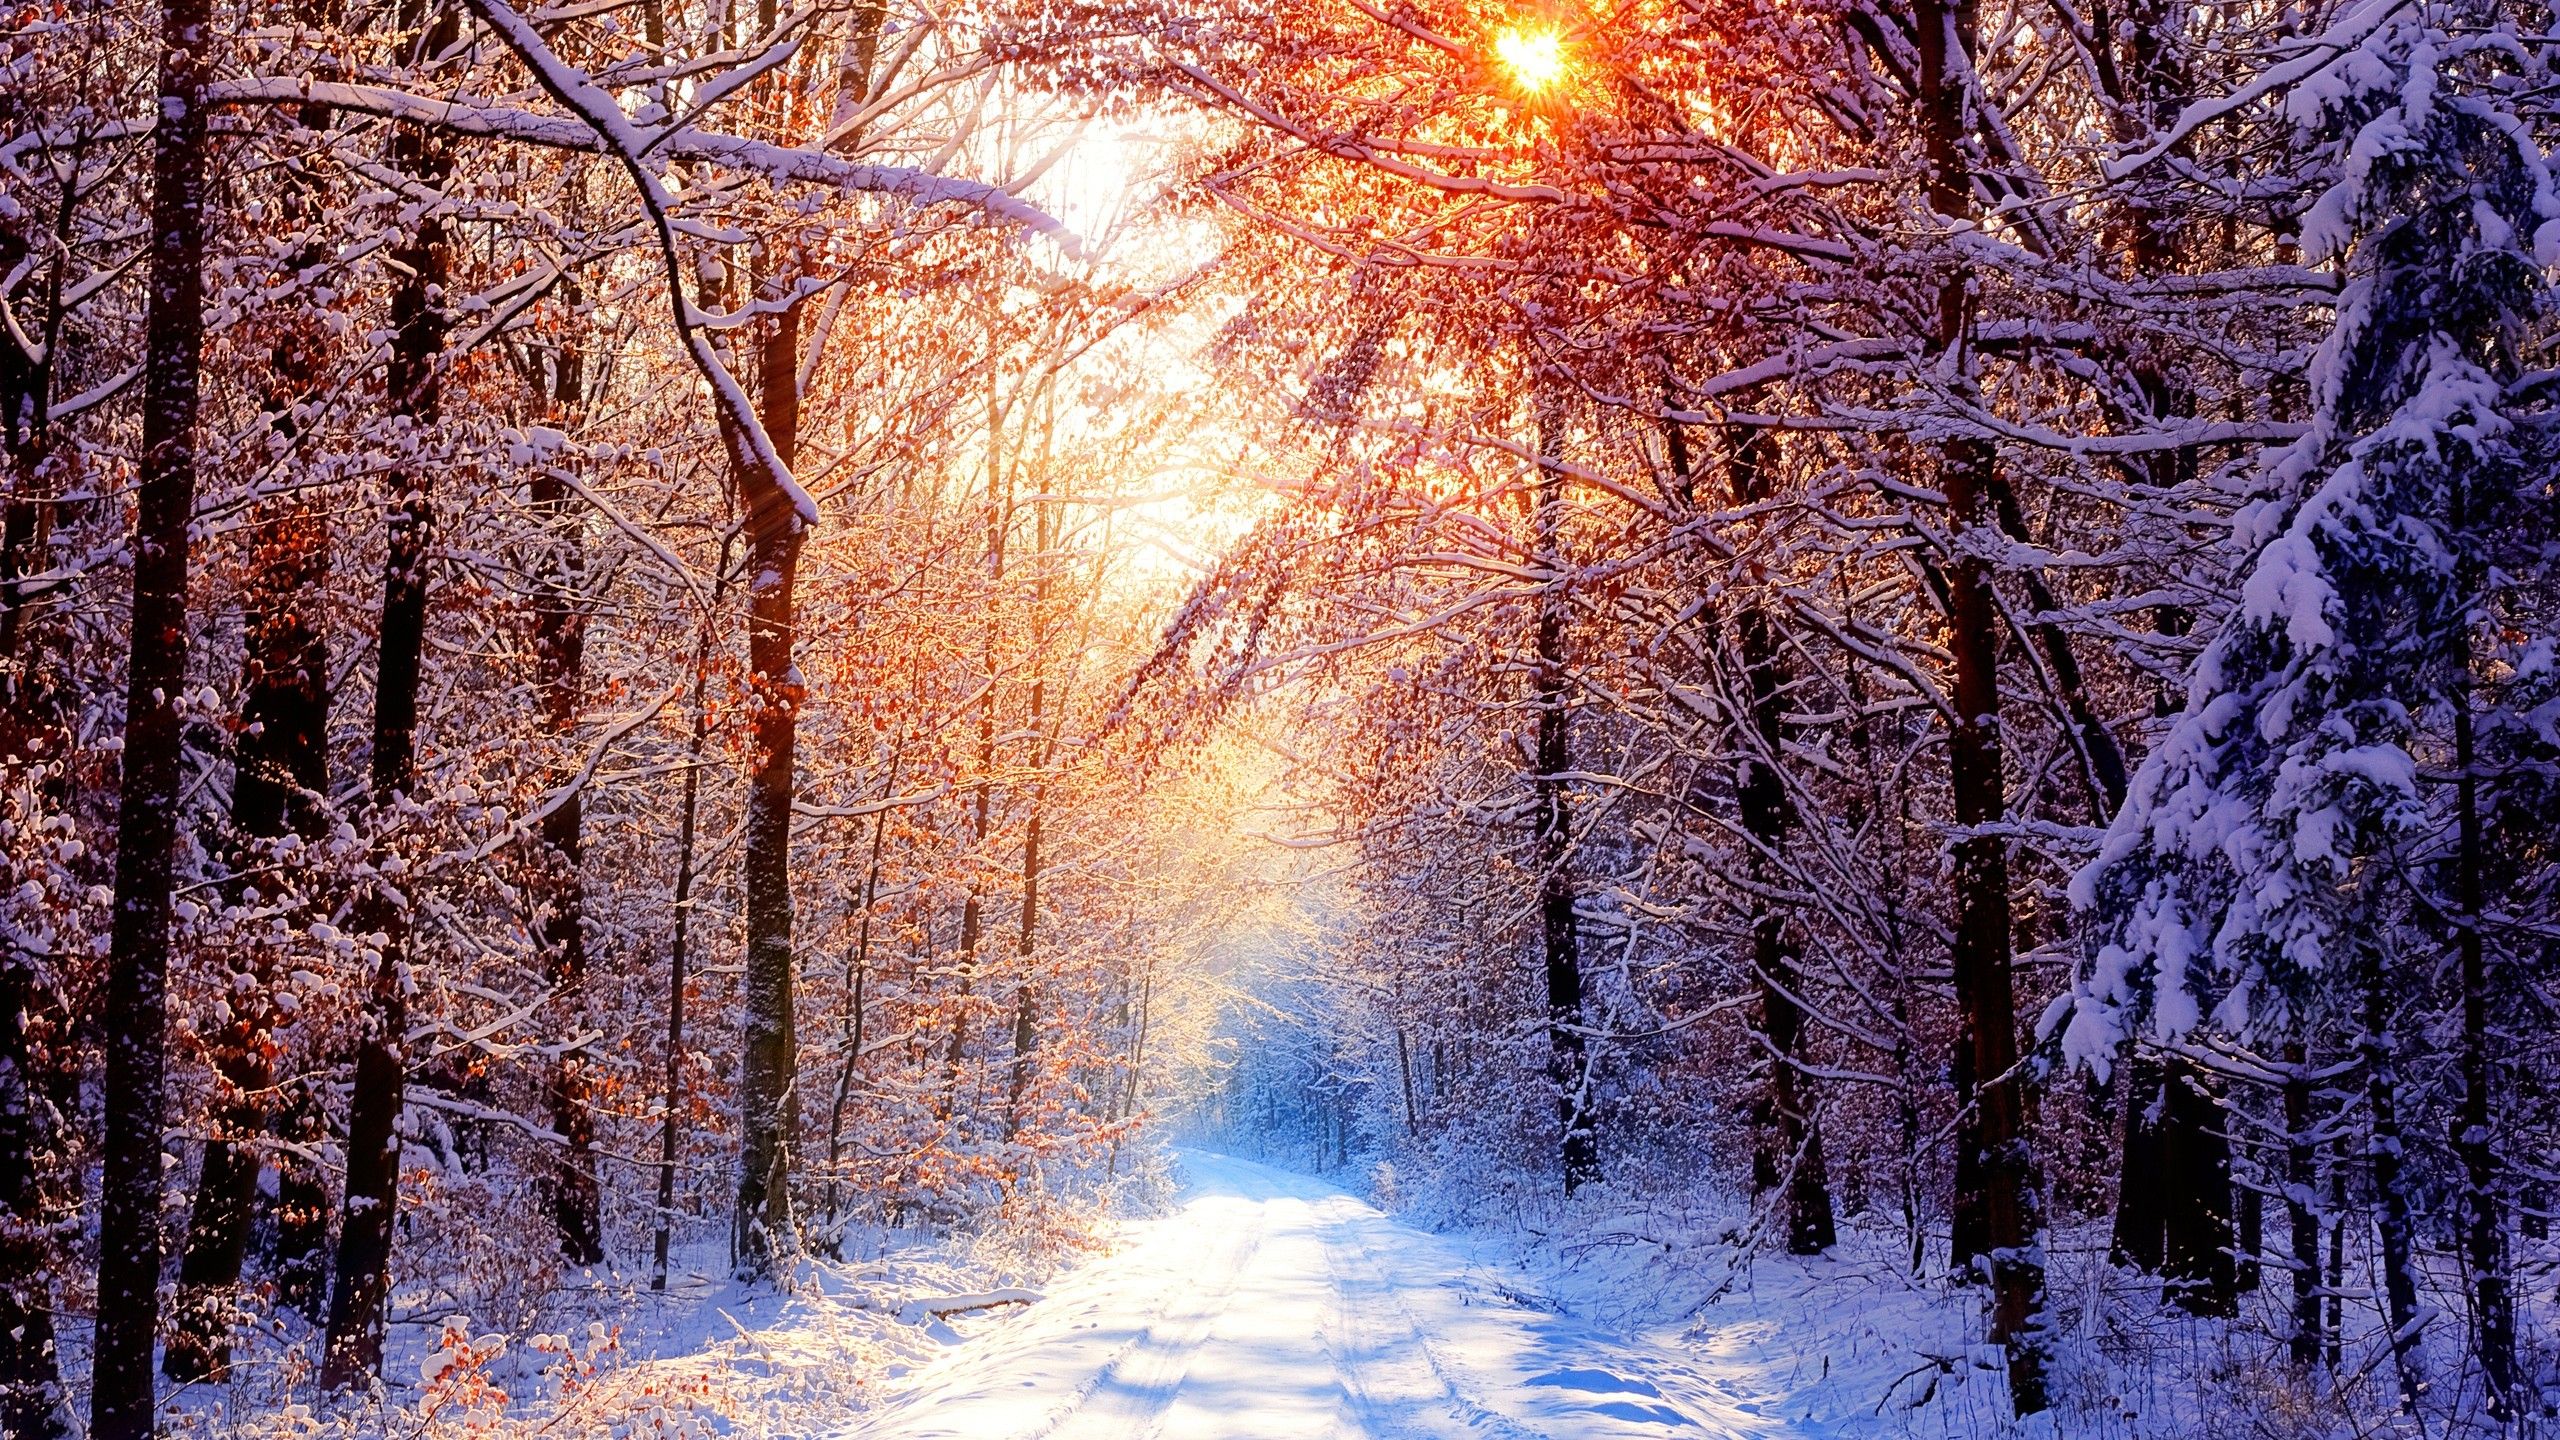 Wallpaper Winter, Morning, Snow, Trees, HD, Nature,. Wallpaper for iPhone, Android, Mobile and Desktop